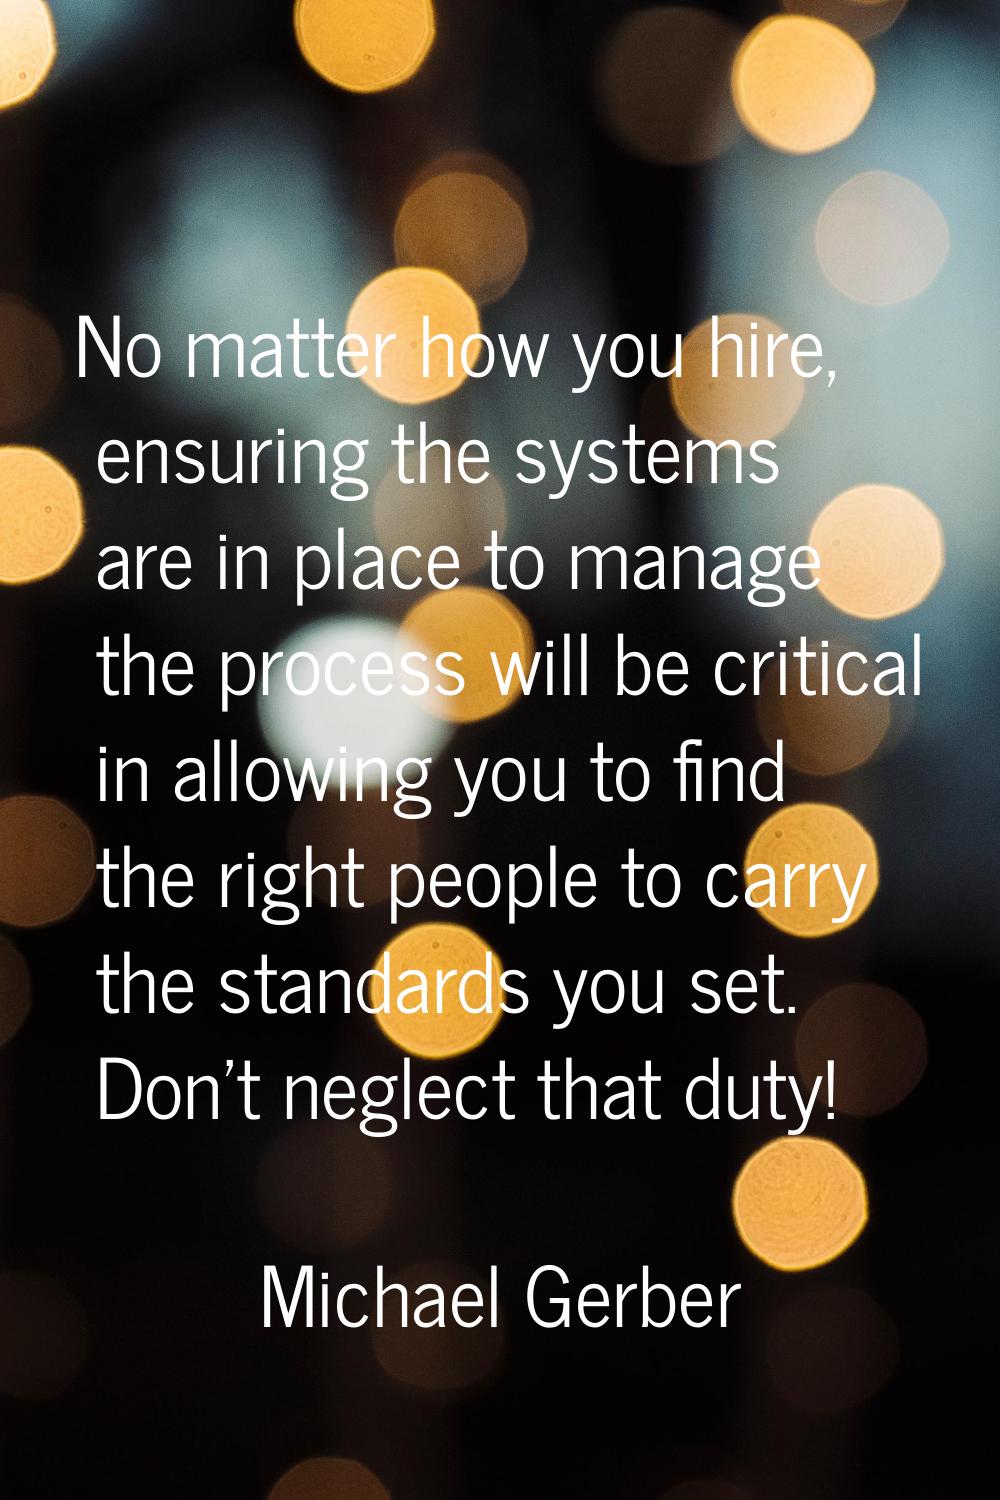 No matter how you hire, ensuring the systems are in place to manage the process will be critical in